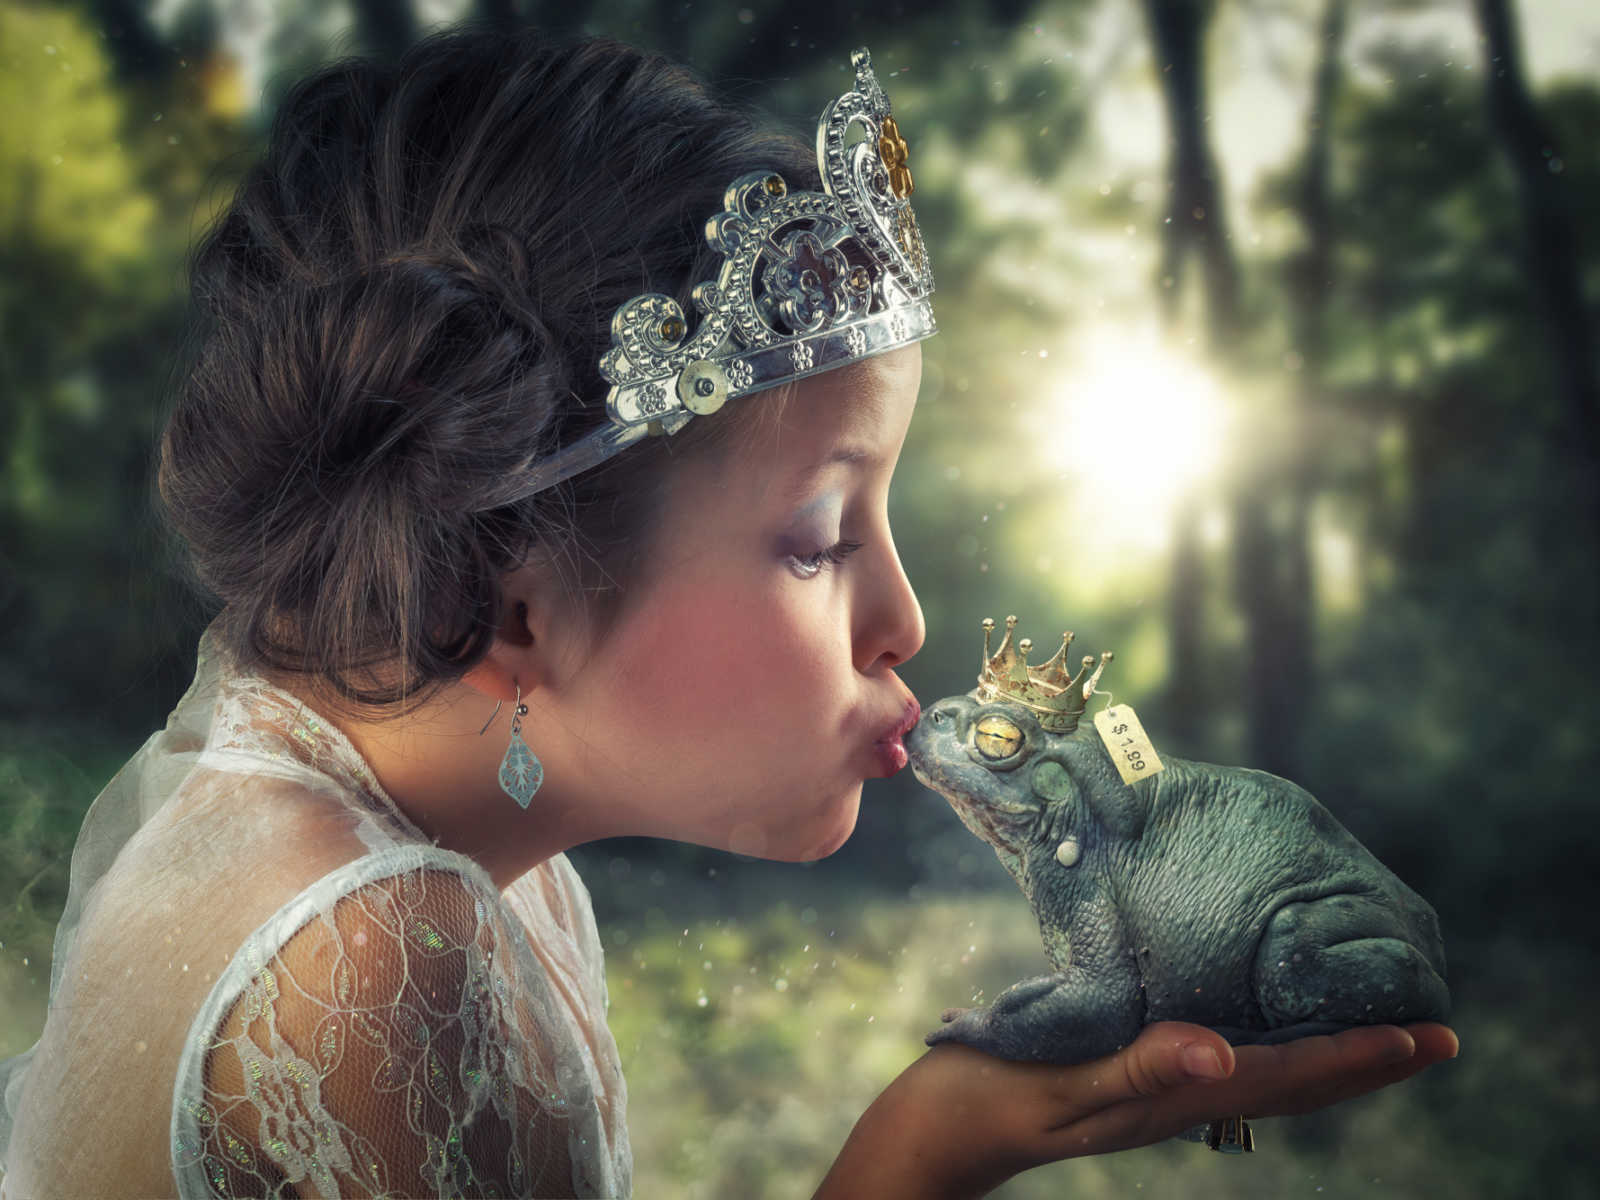 young girl wearing crown holds animated frog with crown on in her hand while giving it a kiss in animated forest